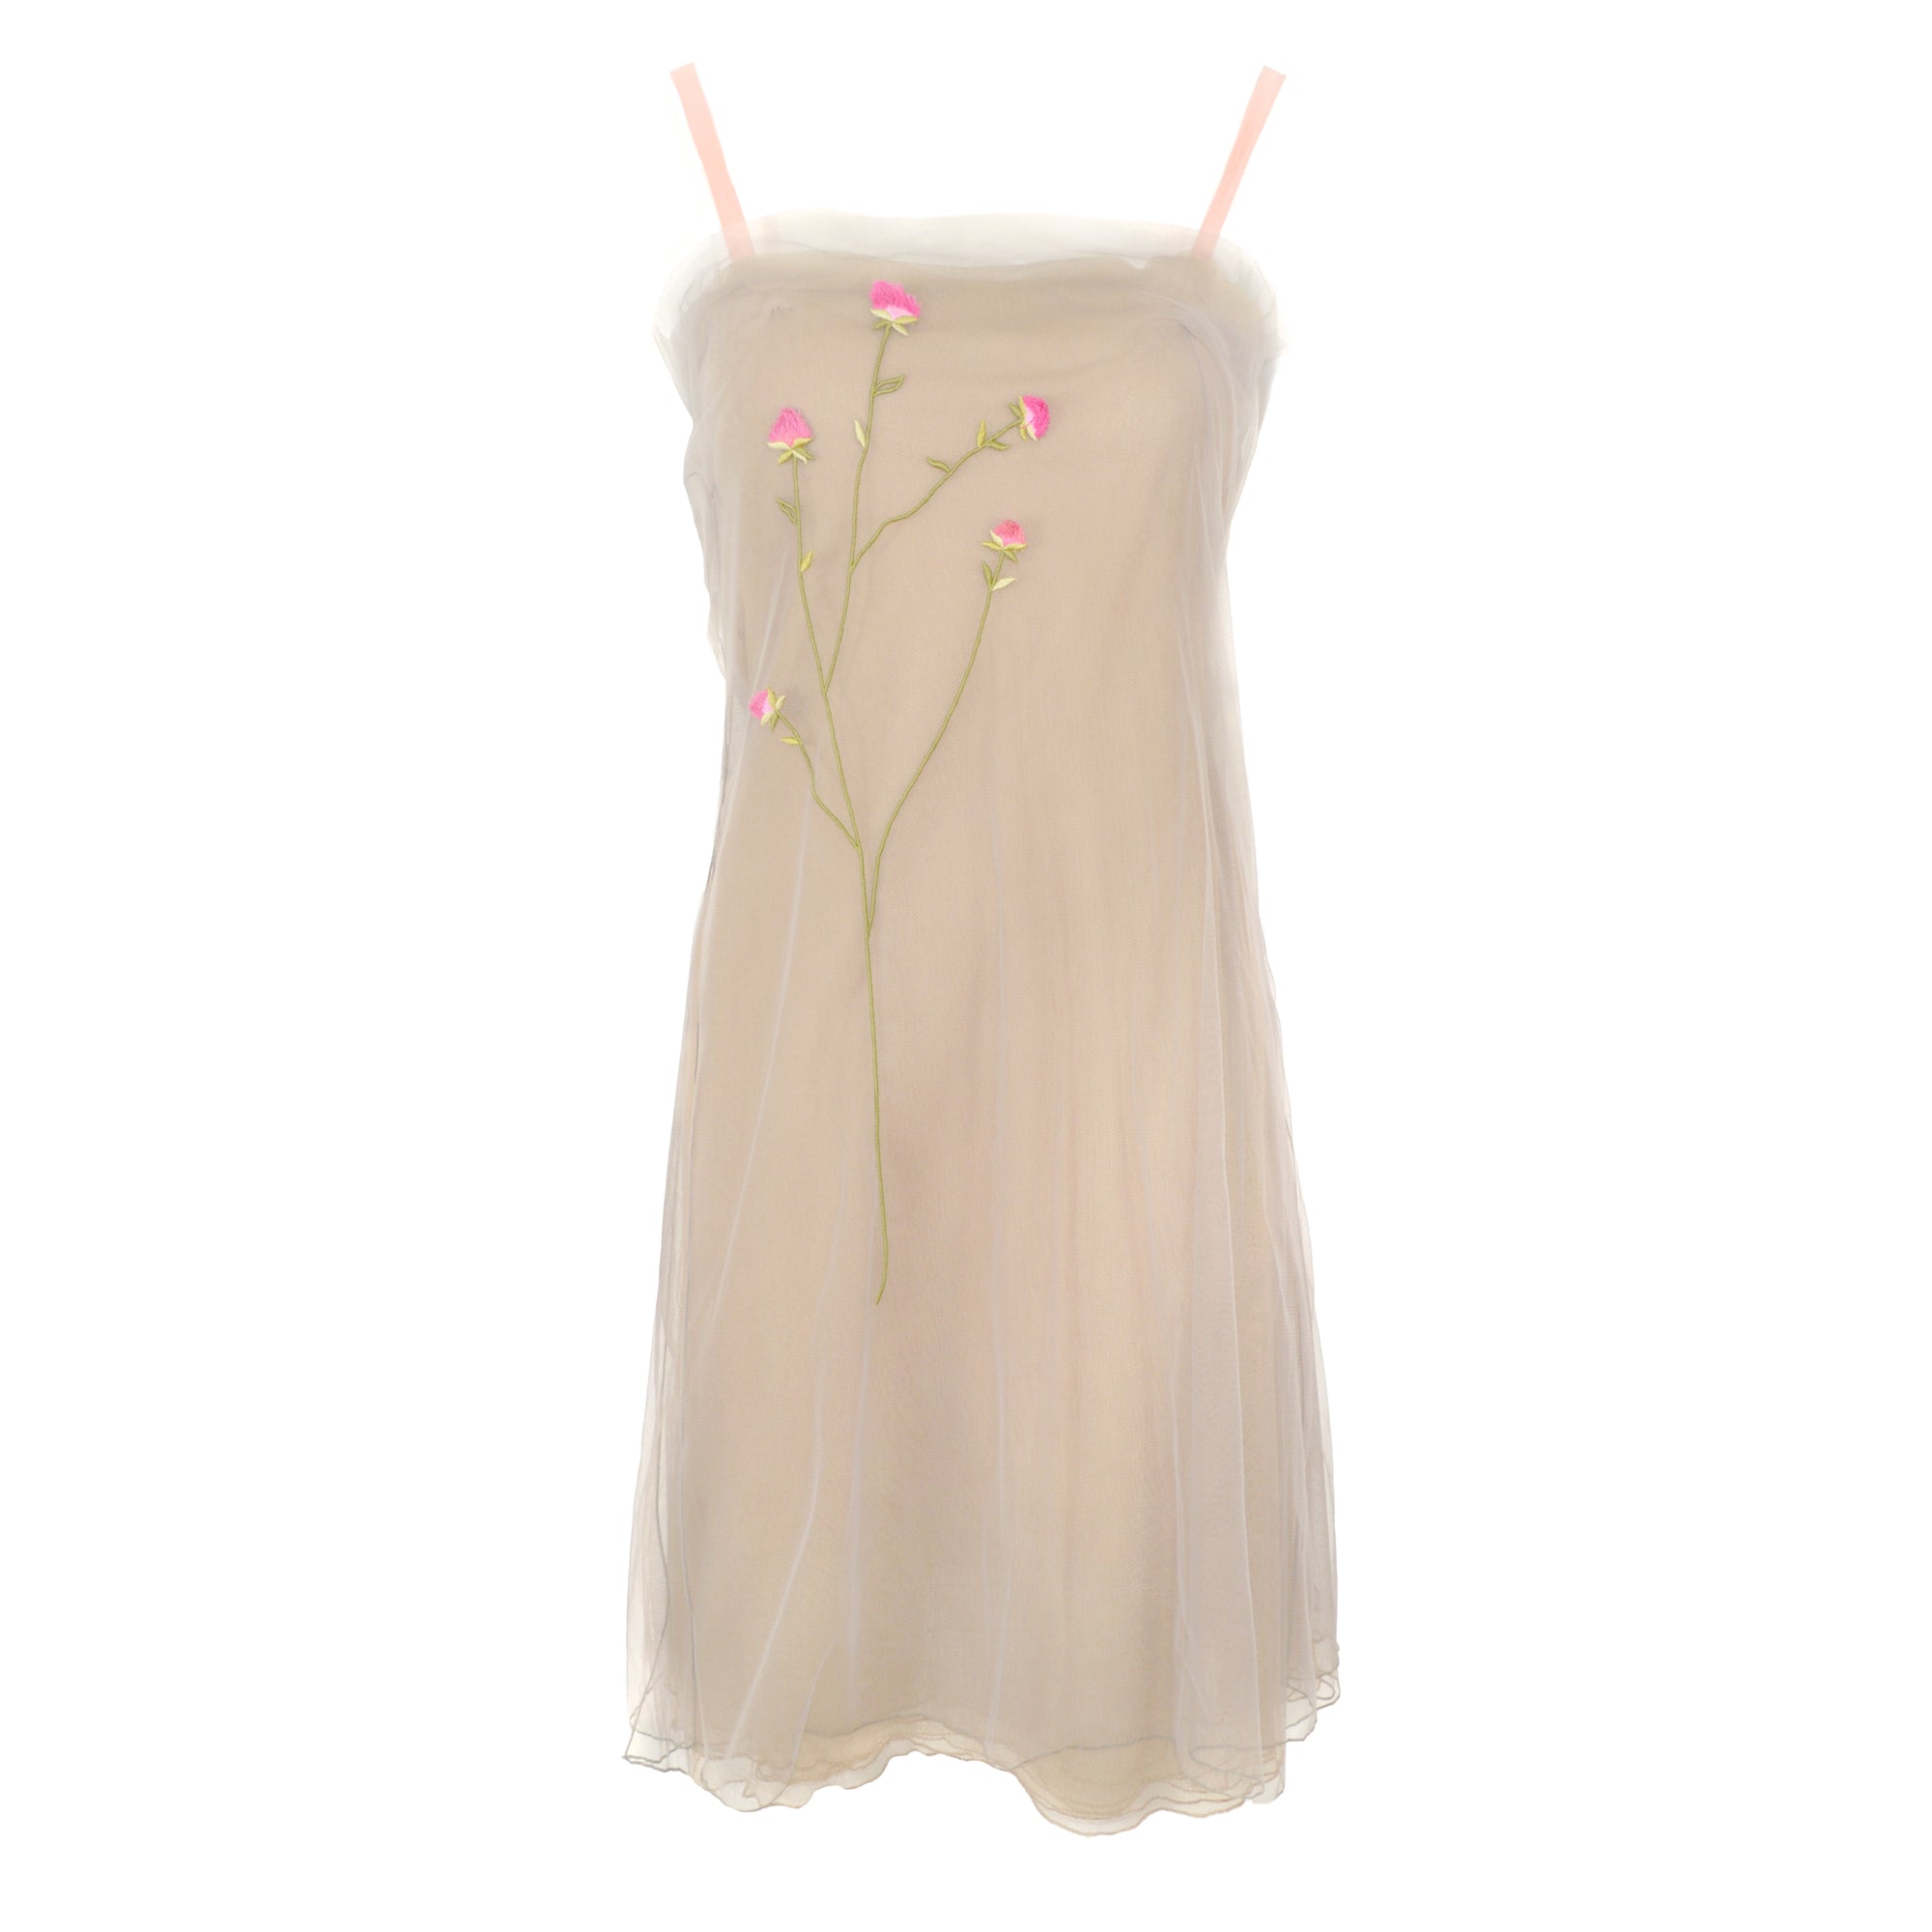 Guy Laroche 1998 layered tulle dress with embroidered flowers